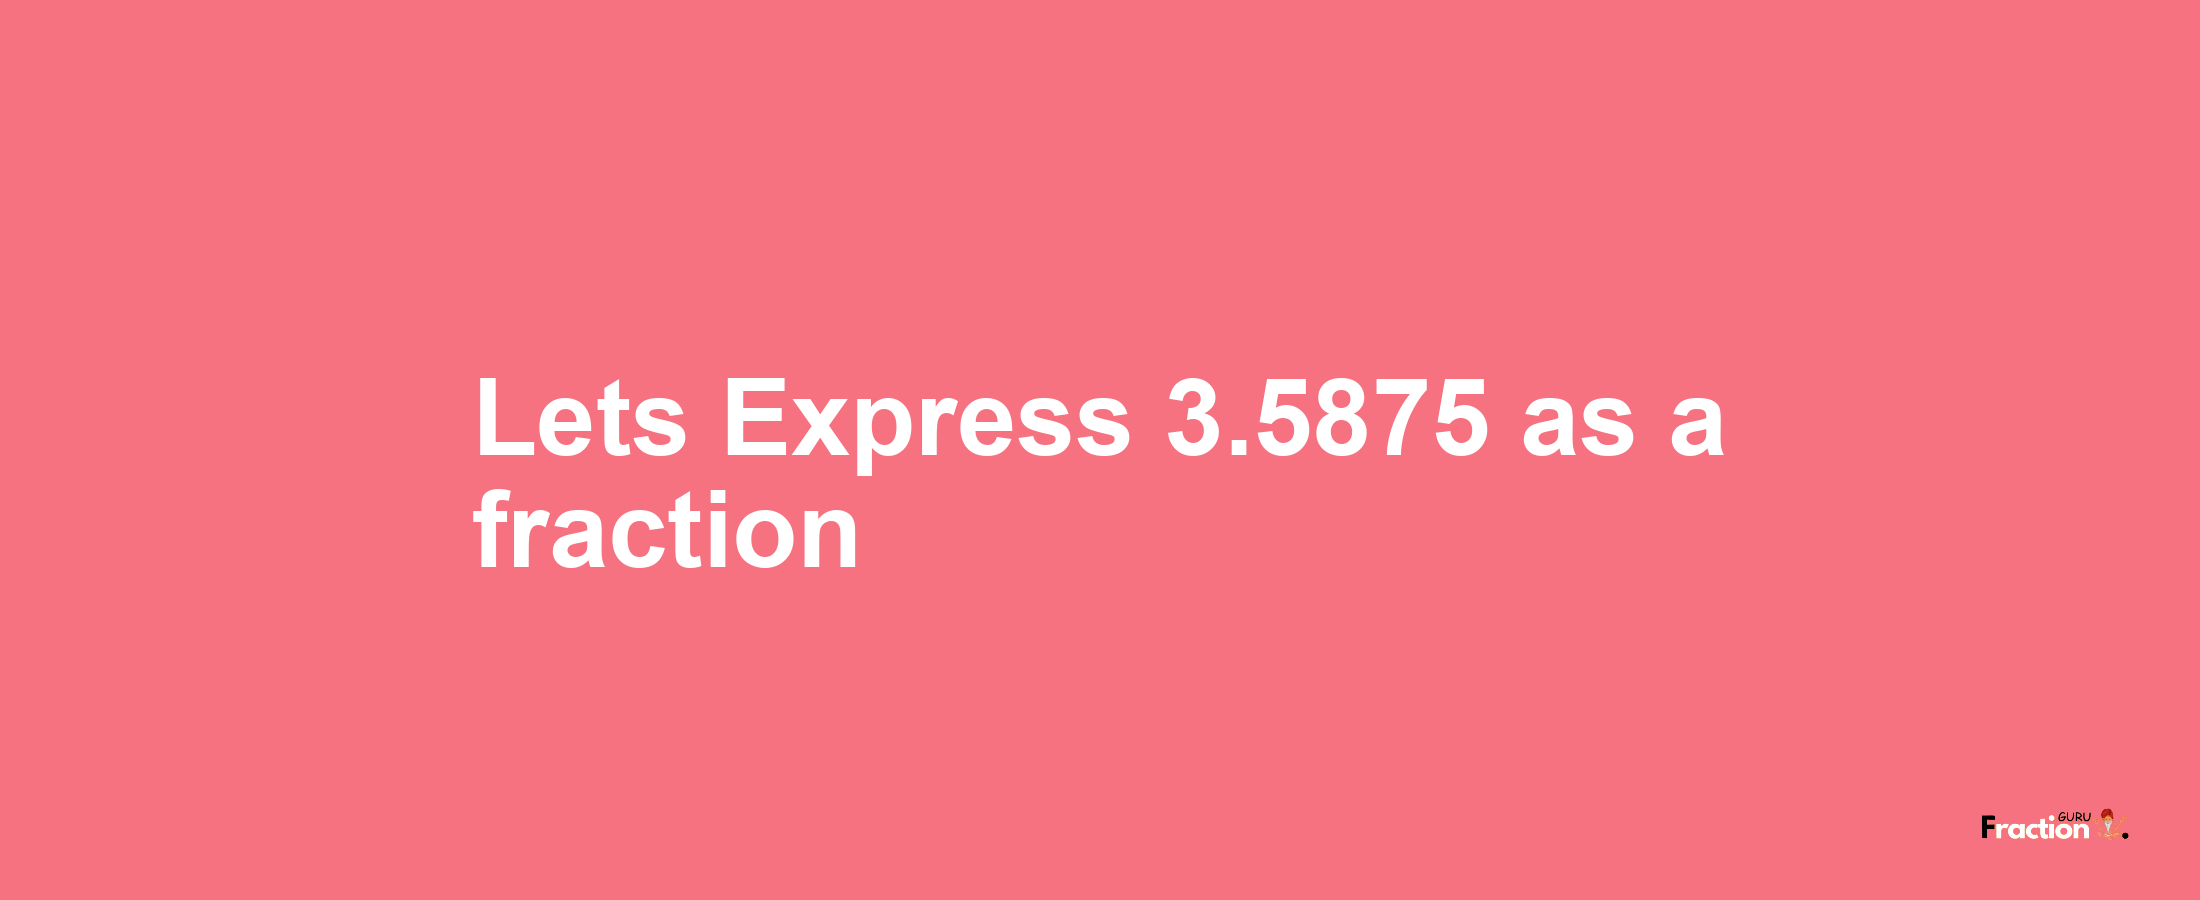 Lets Express 3.5875 as afraction